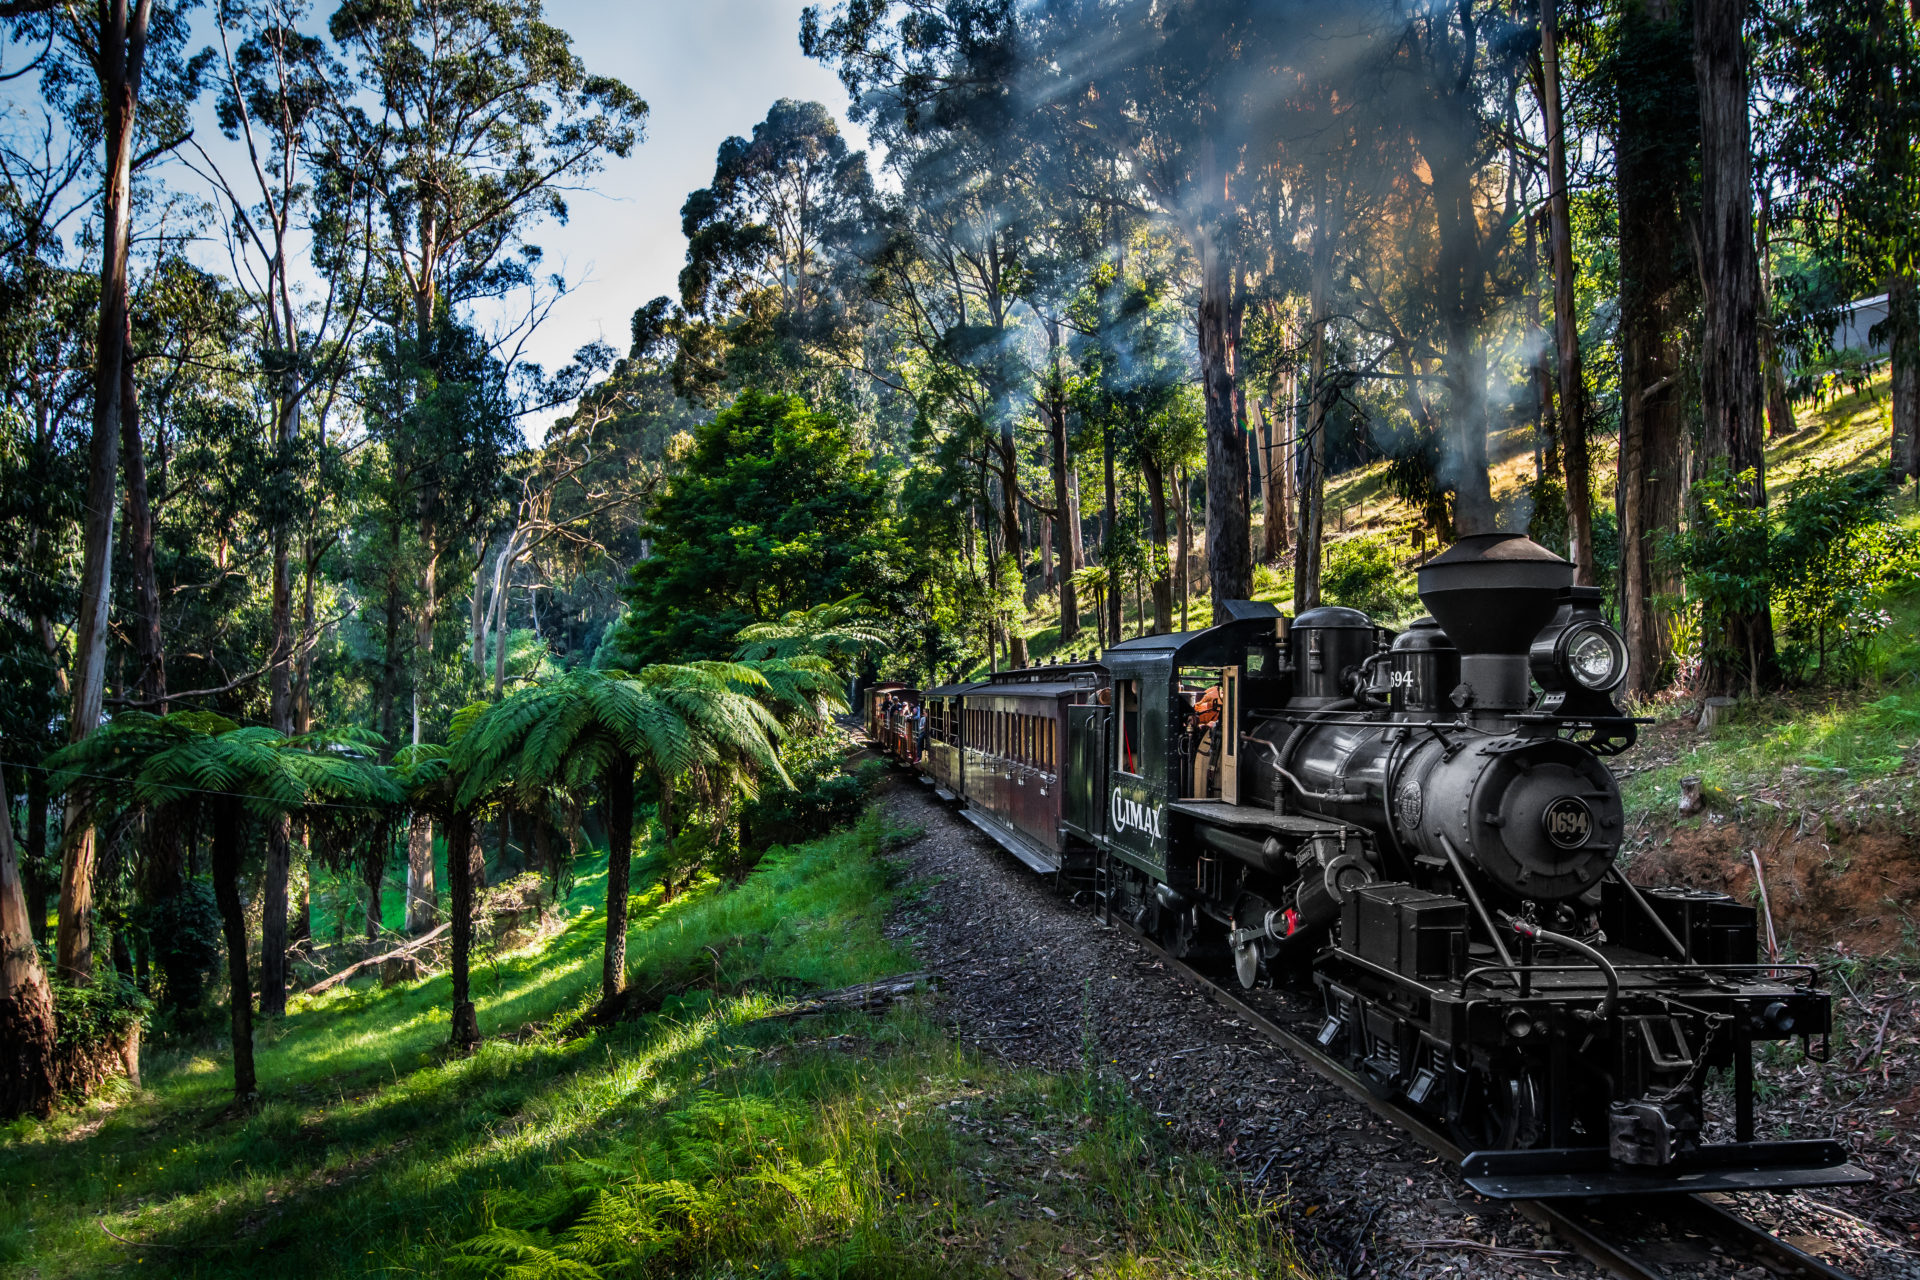 A wood fired steam locomotive travels along a railway track.